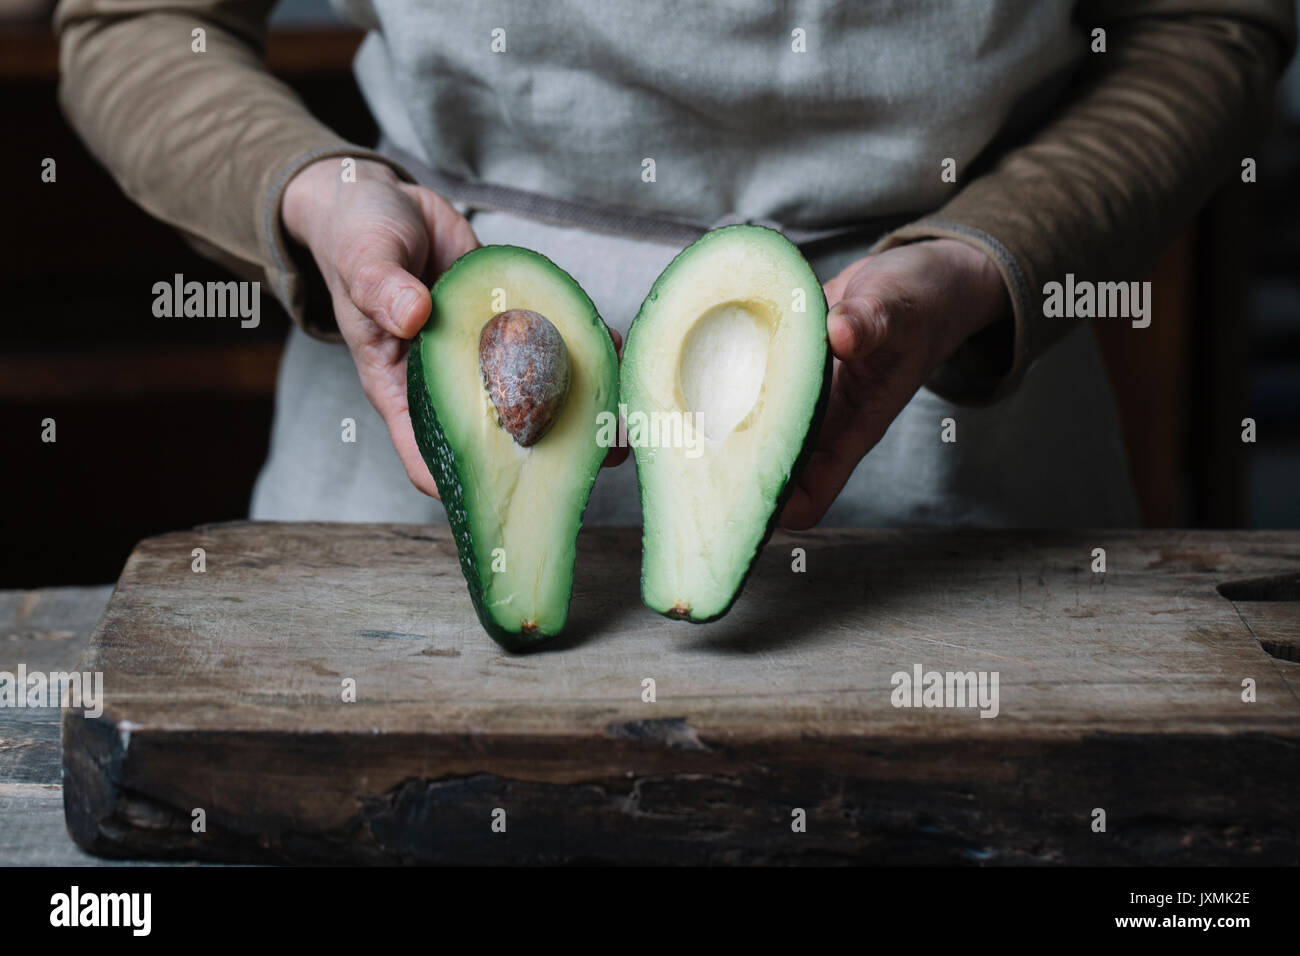 Woman holding halved avocado, mid section Stock Photo